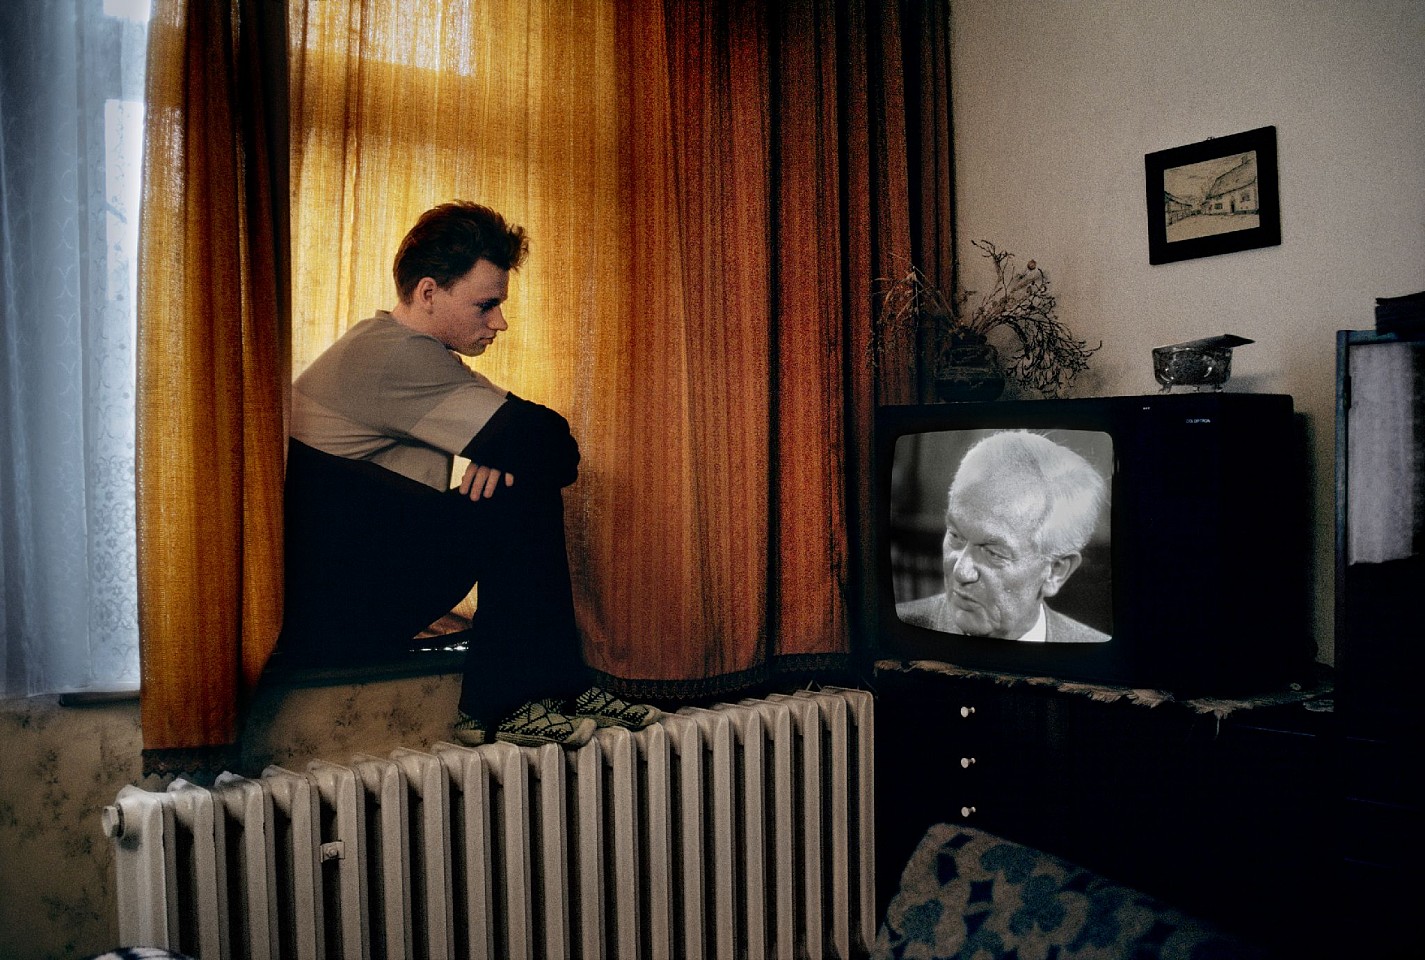 Steve McCurry, Boy Watches Television, 1990
FujiFlex Crystal Archive Print
Price/Size on request